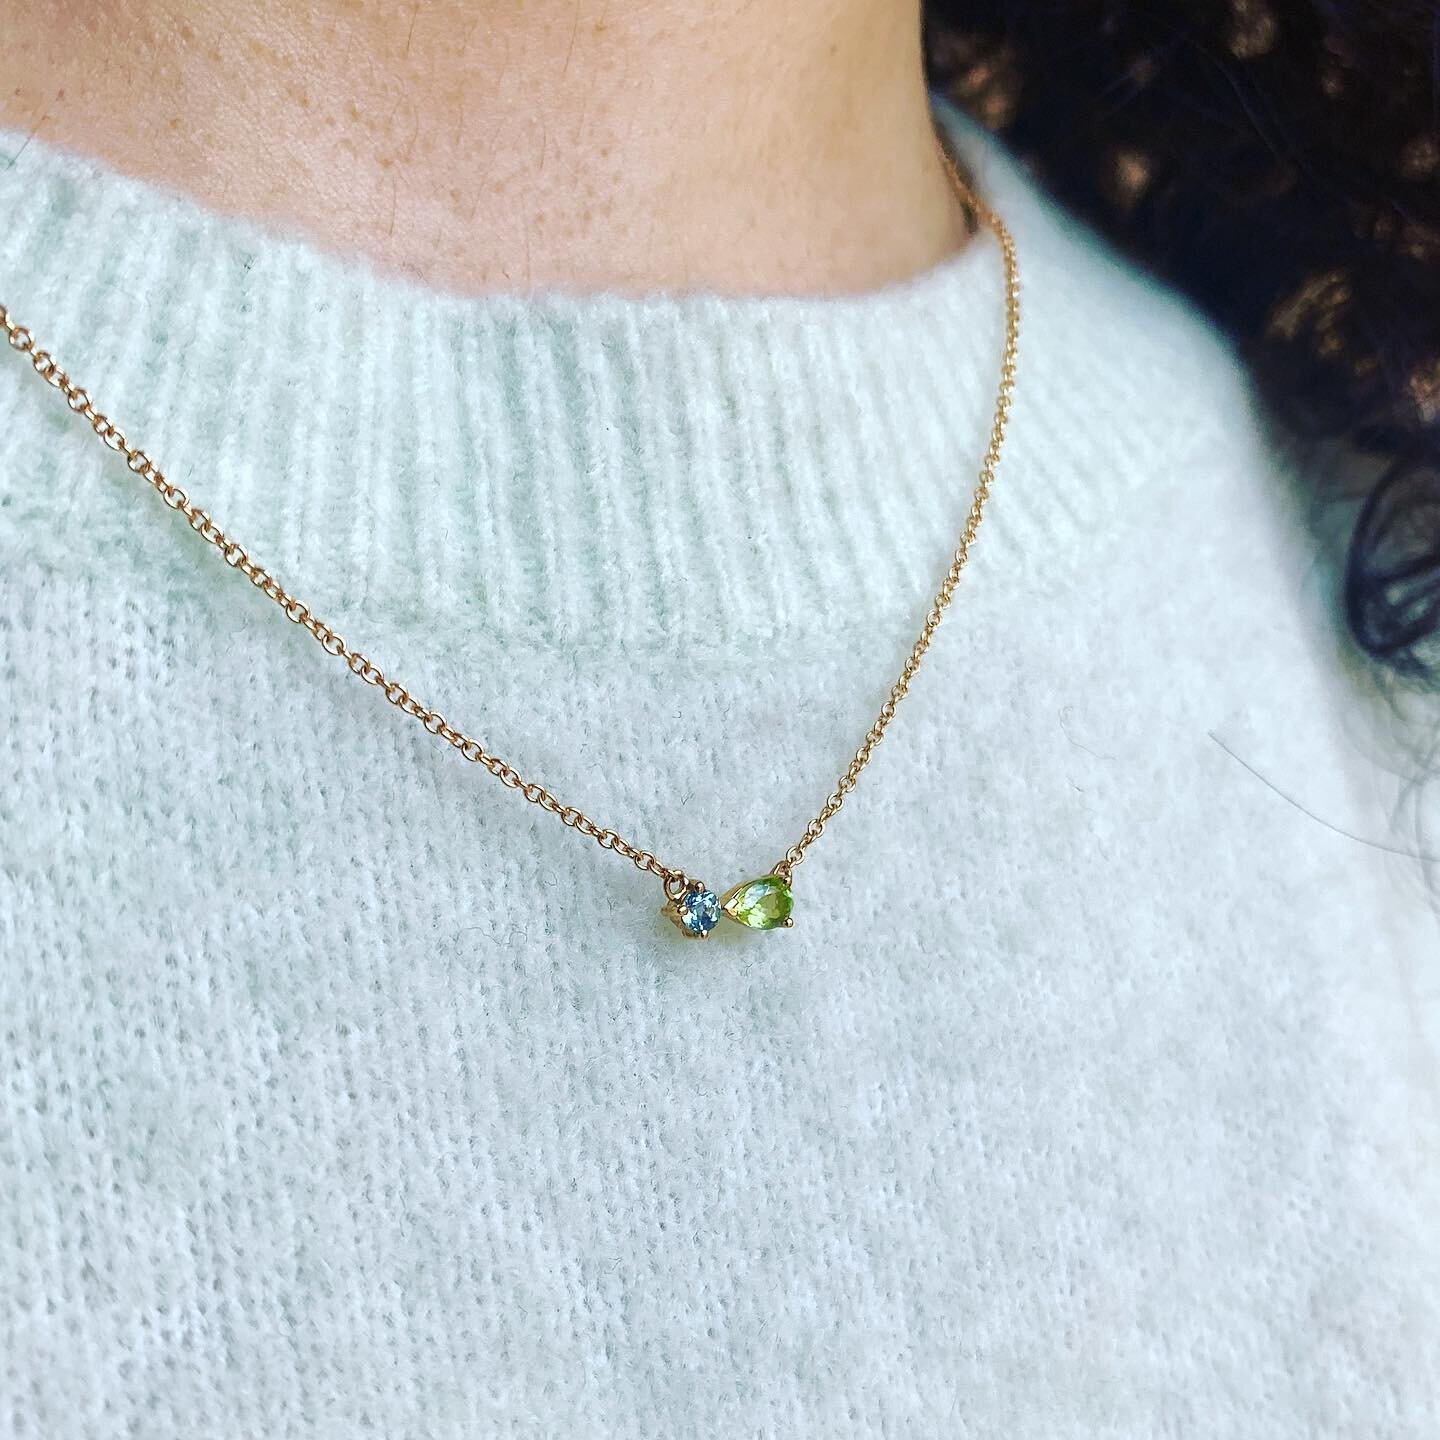 Signature Duet necklace with natural gemstones 💚
.
.
.
.
.
#solidgold #necklaces #giftideas  #finejewellery #melbournejewellery #everydayjewellery #birthstone #gemstone #diamond #gems #jewellerydesign #yellowgold